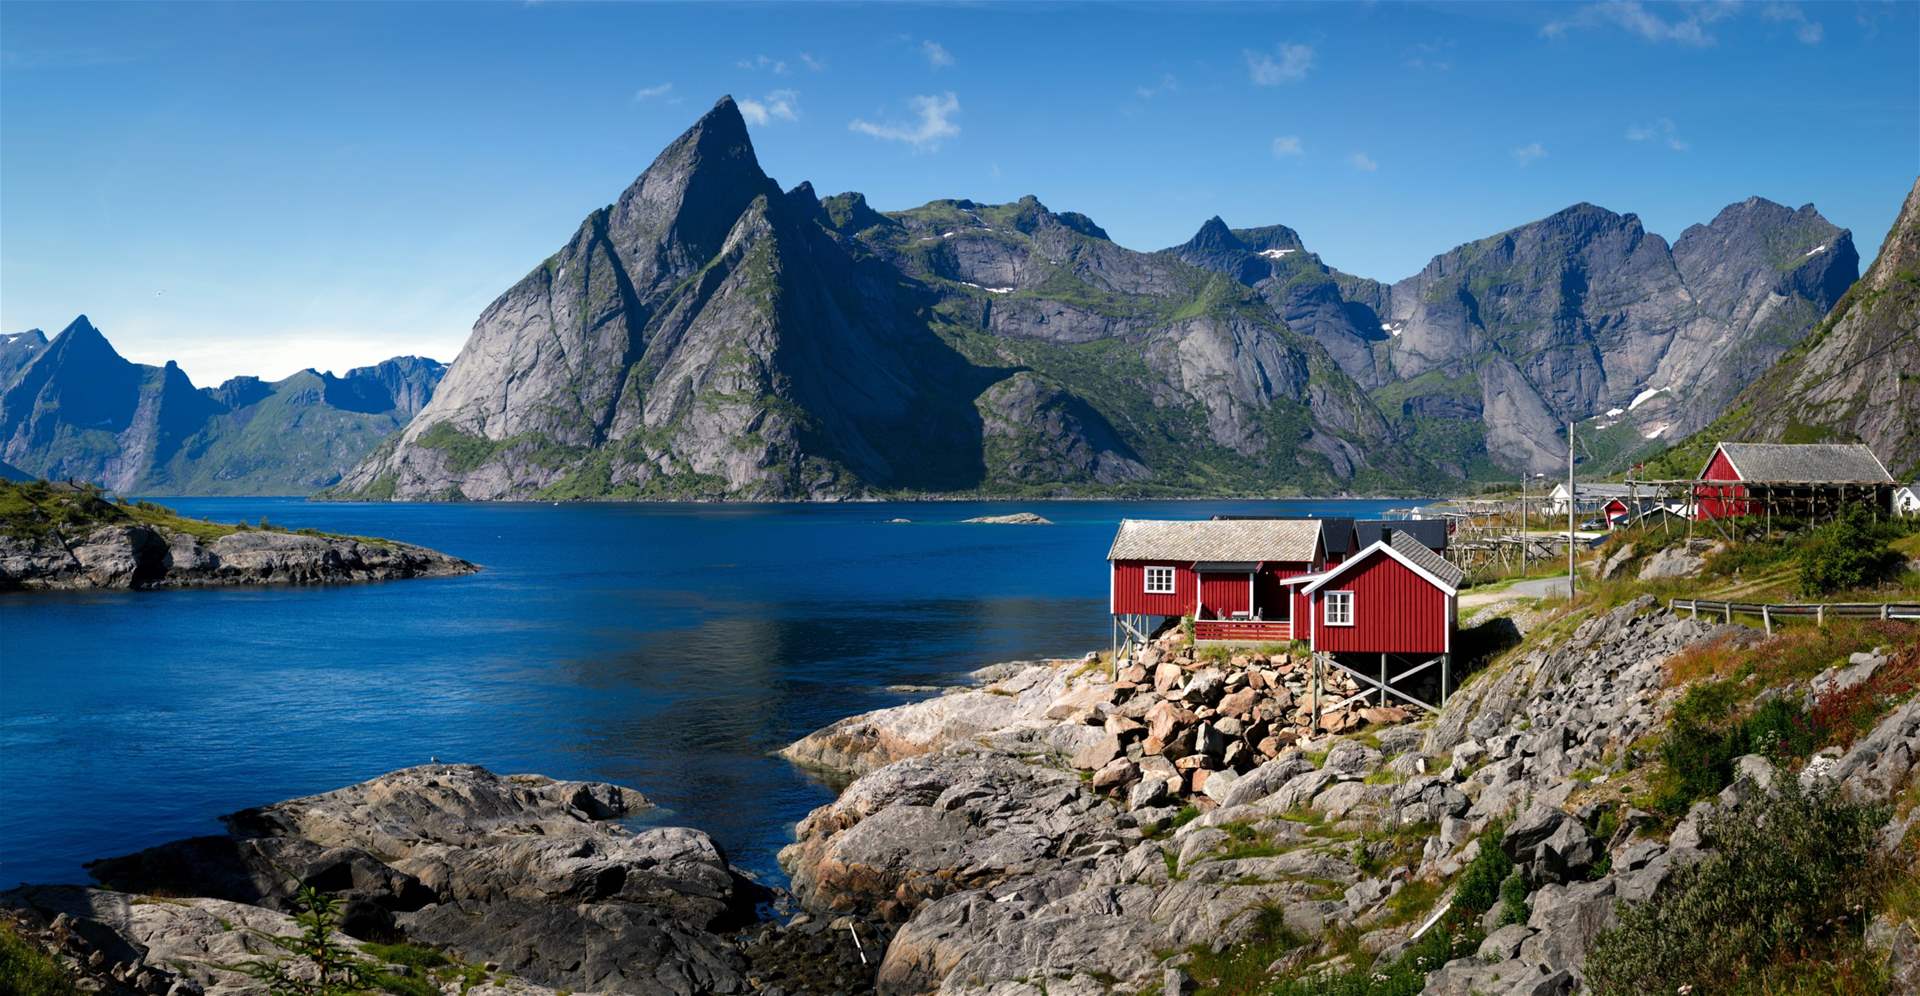 Tourist places that you should not miss when traveling to Norway